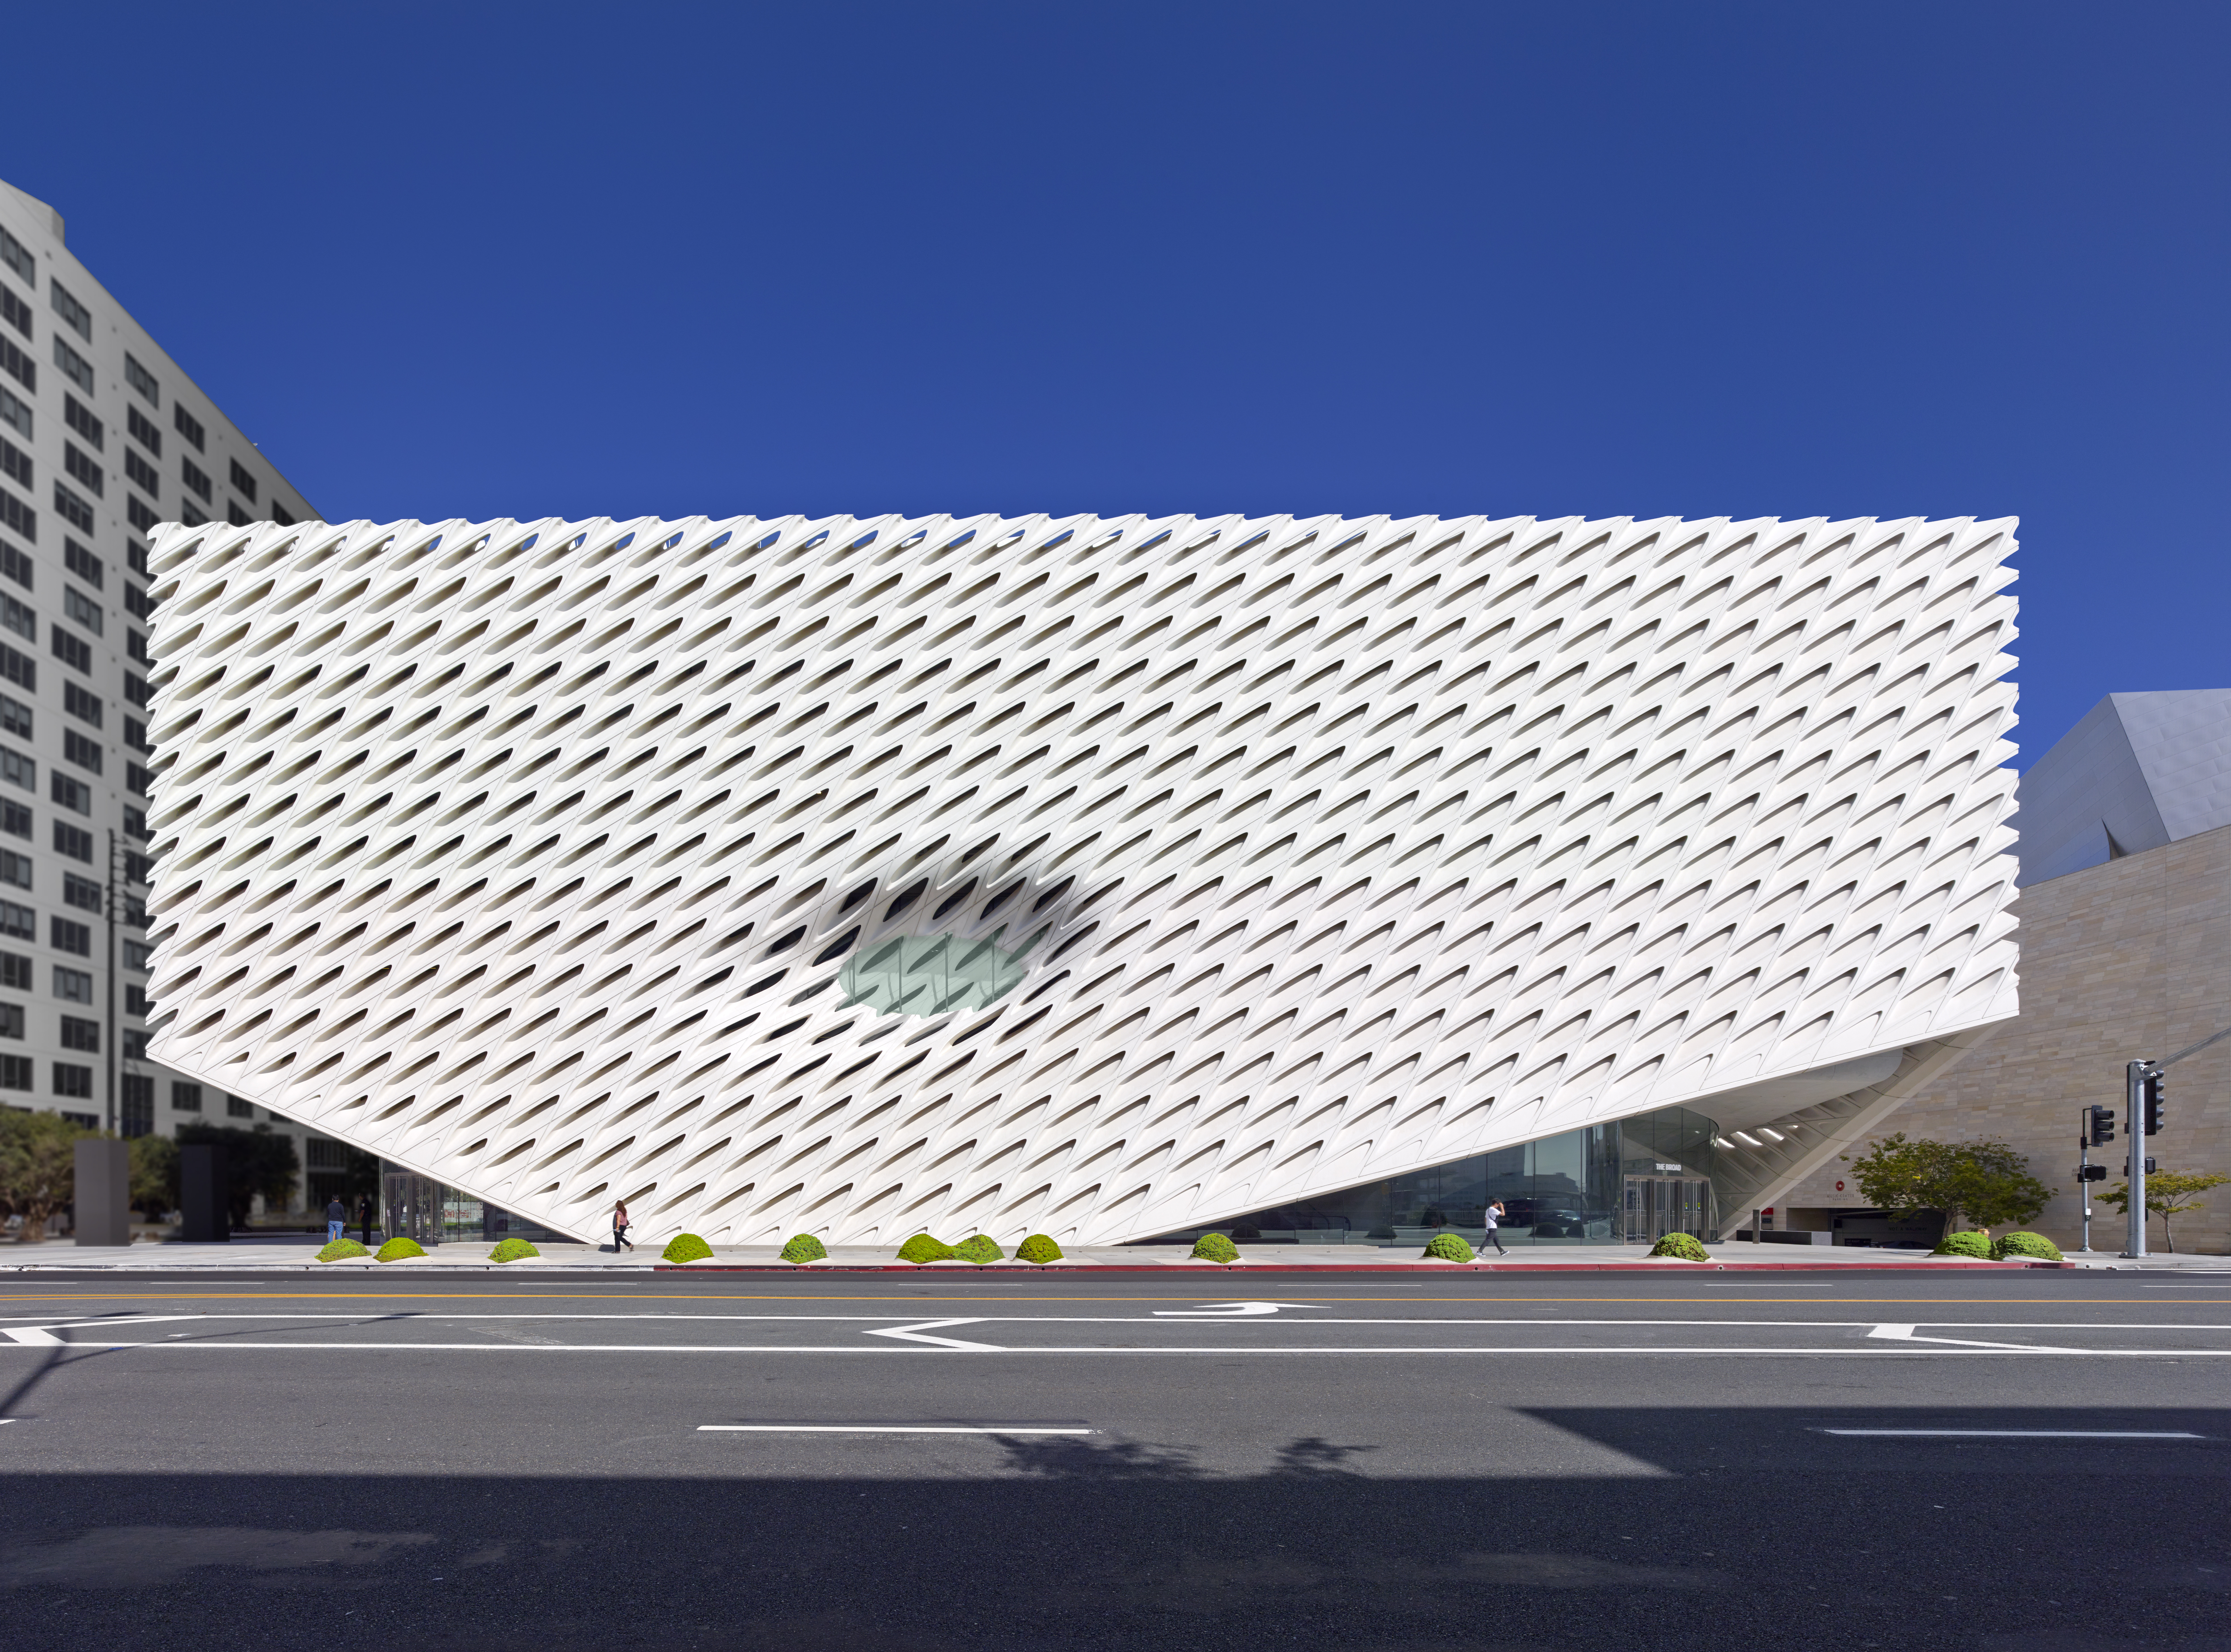 The Broad appoints four new members to board of directors